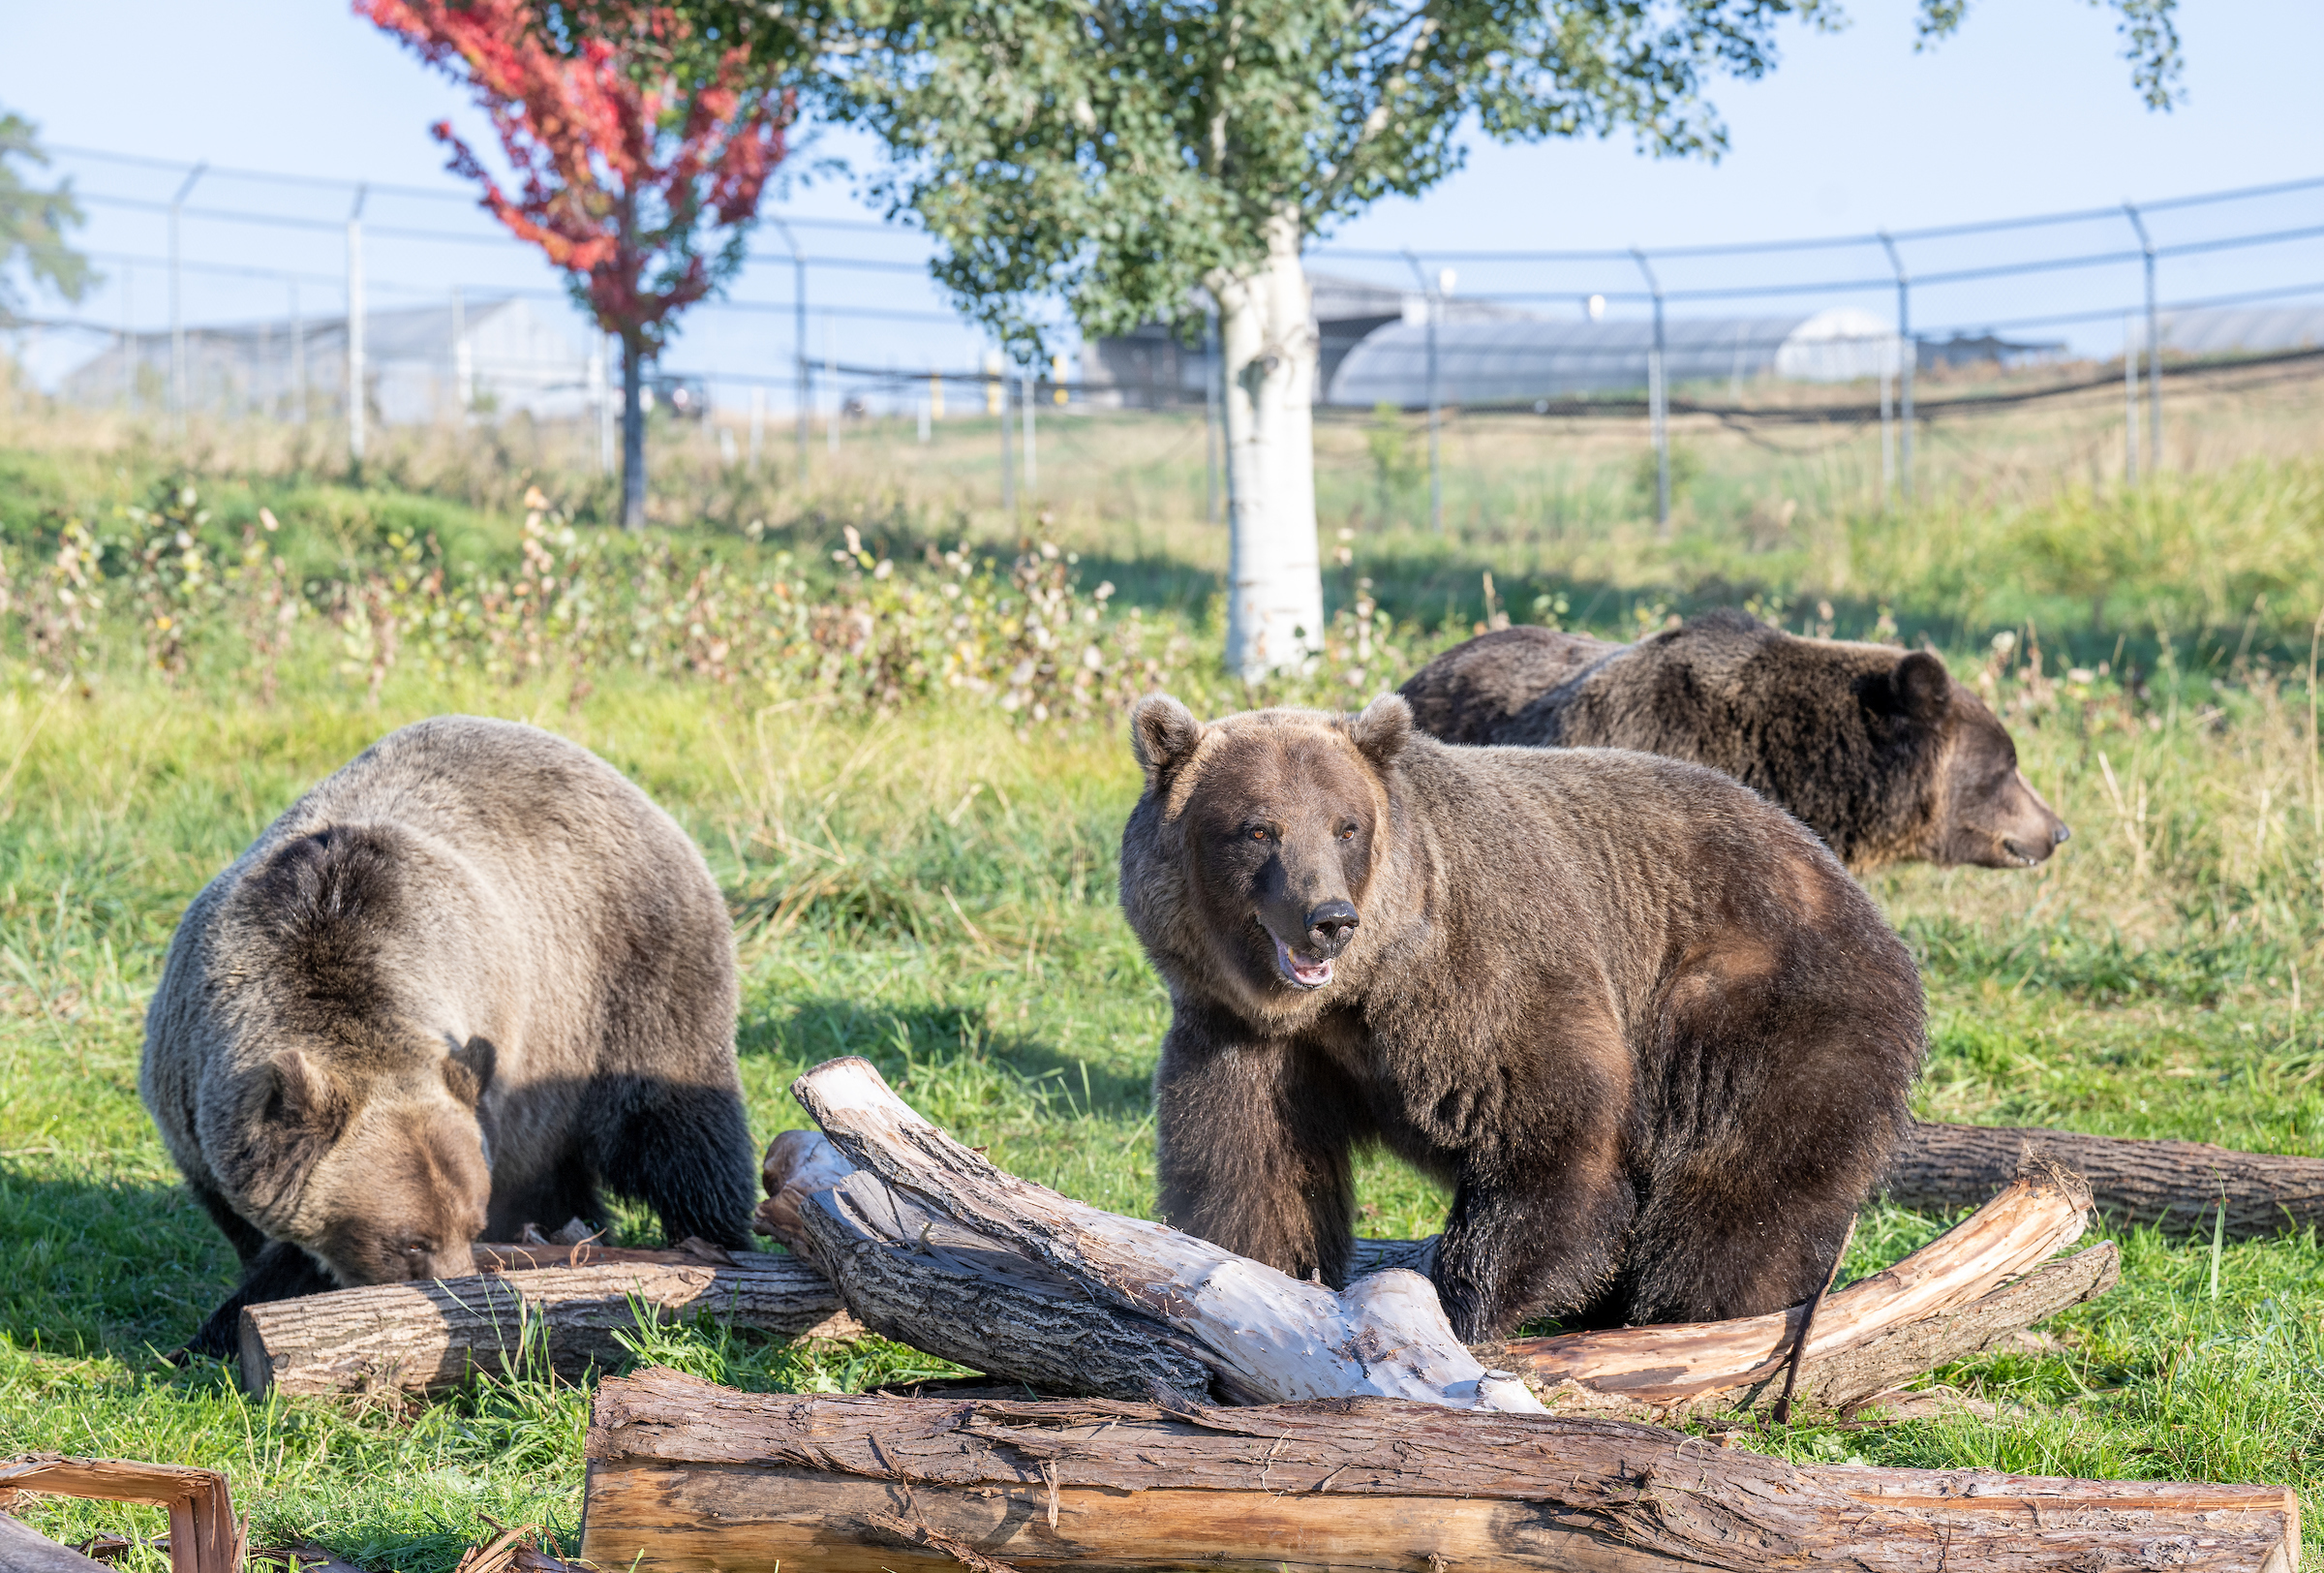 Jebbie the grizzly bear 'very happy' at wildlife sanctuary, Detroit Zoo  says 